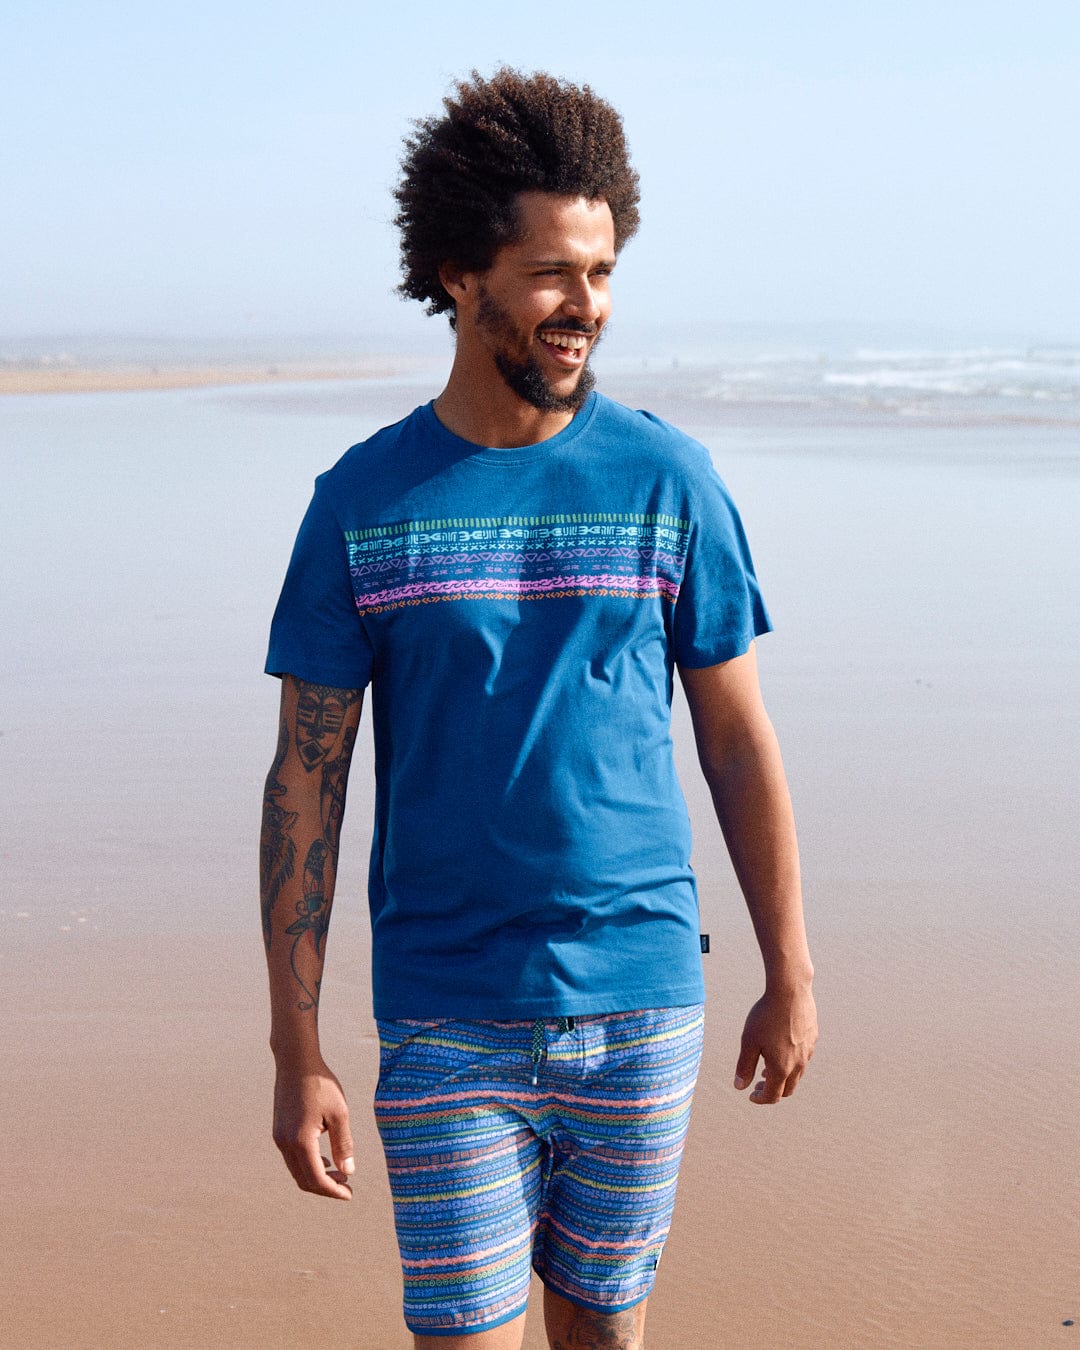 A man with curly hair and a tattoo on his arm wearing a Saltrock Marks Chest - Mens Short Sleeve T-Shirt in Blue and shorts standing on a beach.